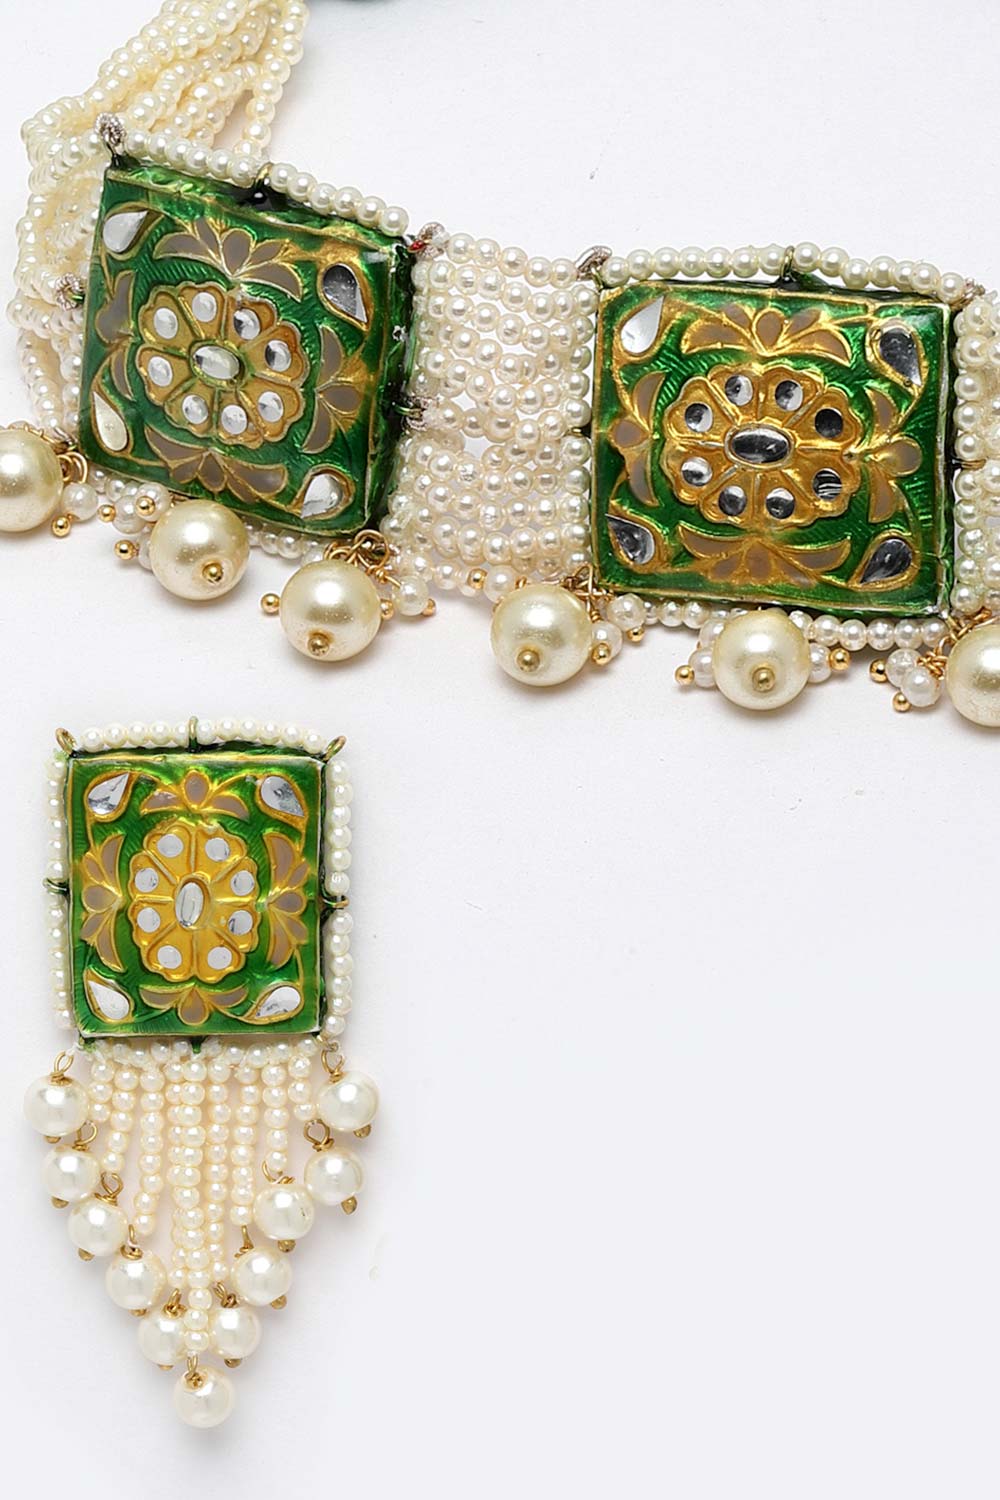 Green And White Gold-Plated Pearls And Natural Stones Jewellery Set